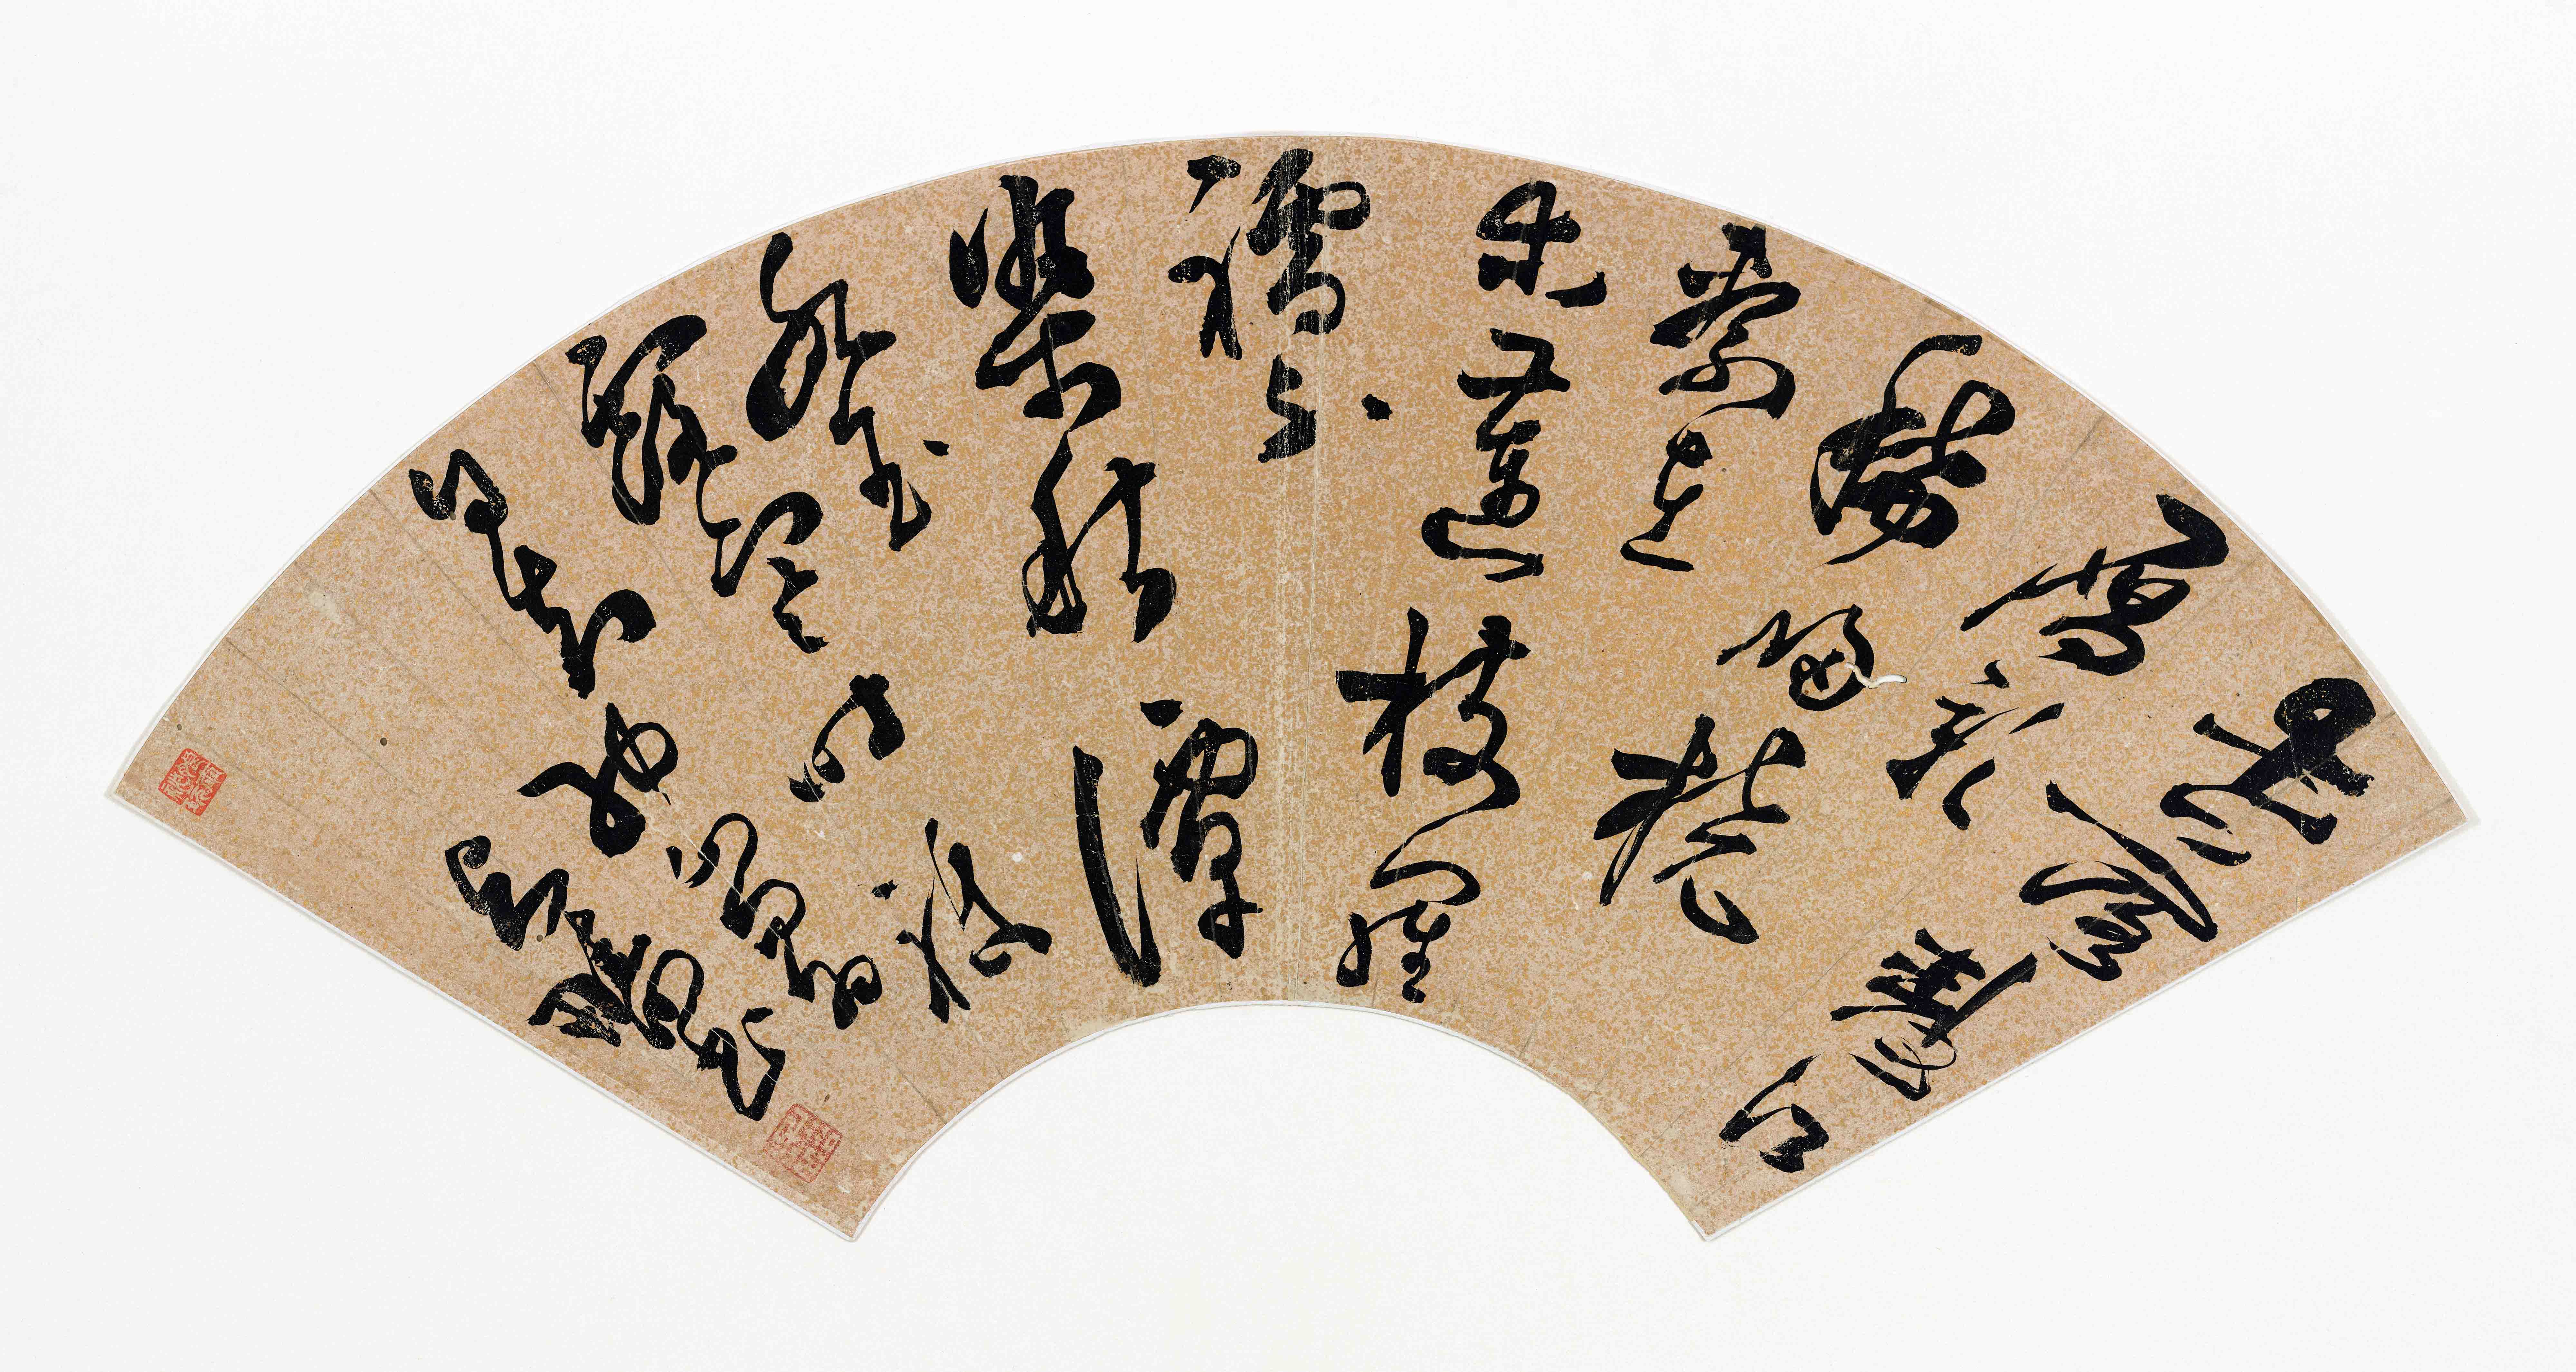 Wang Wen (1497–1576), Poem in cursive script, Ming dynasty, mid 16th century, ink on gold-flecked paper, China, 18.8 x 50.8 cm (Freer Gallery of Art, Smithsonian Institution, Washington, DC: Purchase — Charles Lang Freer Endowment, F1988.7)